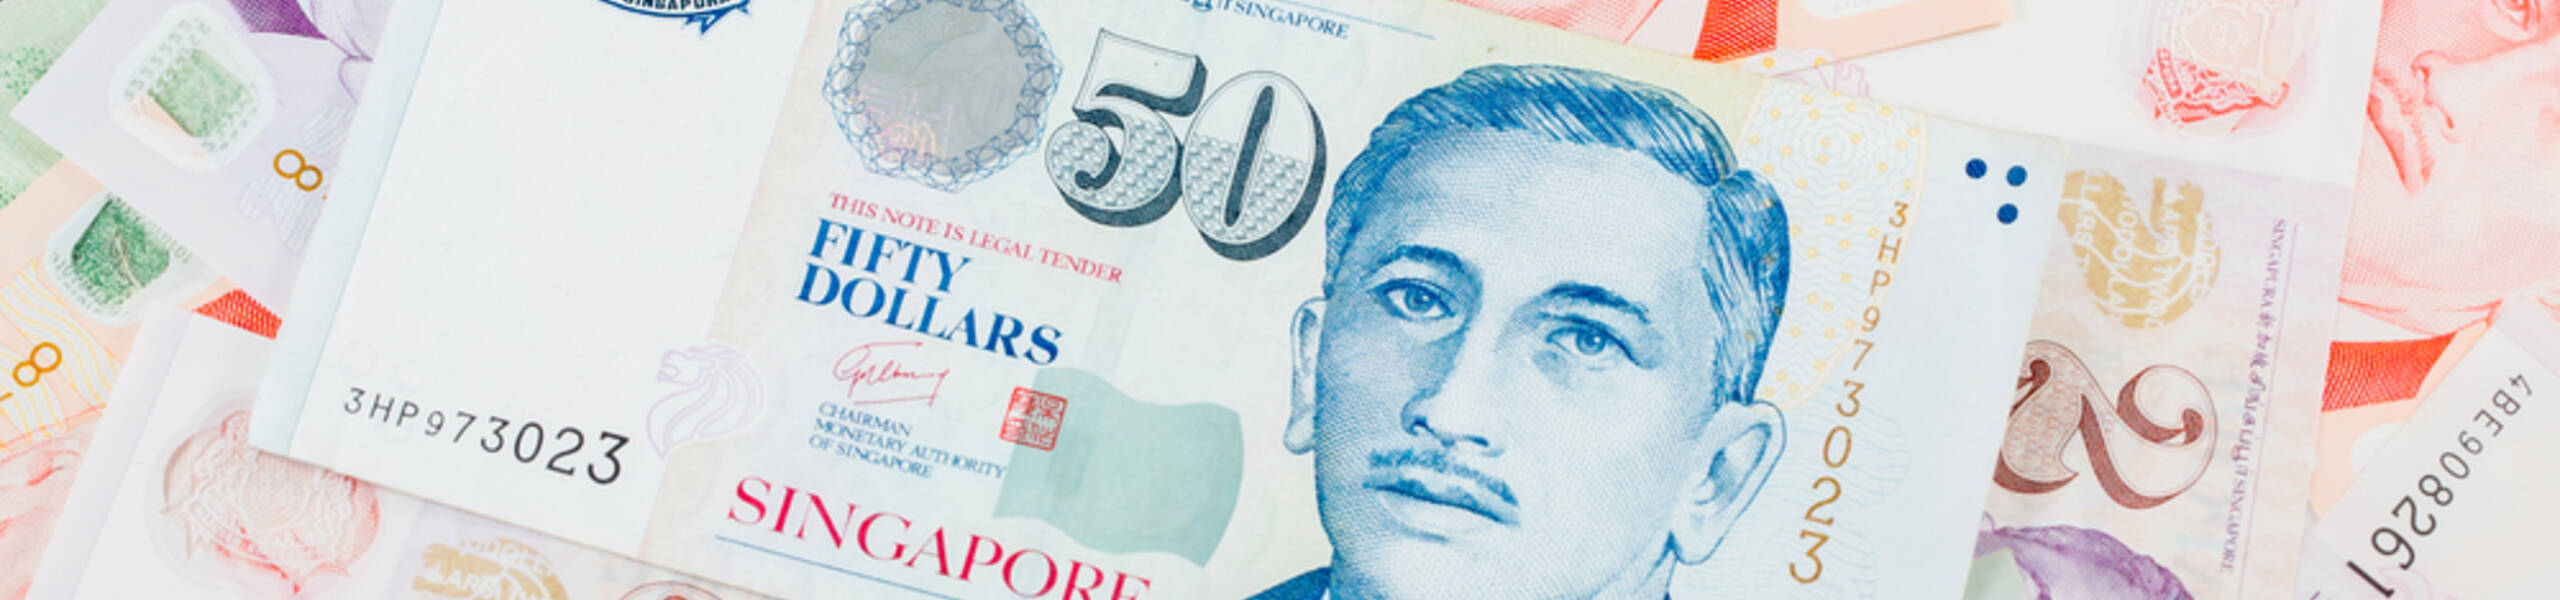 Is it time to look at the Singapore dollar?